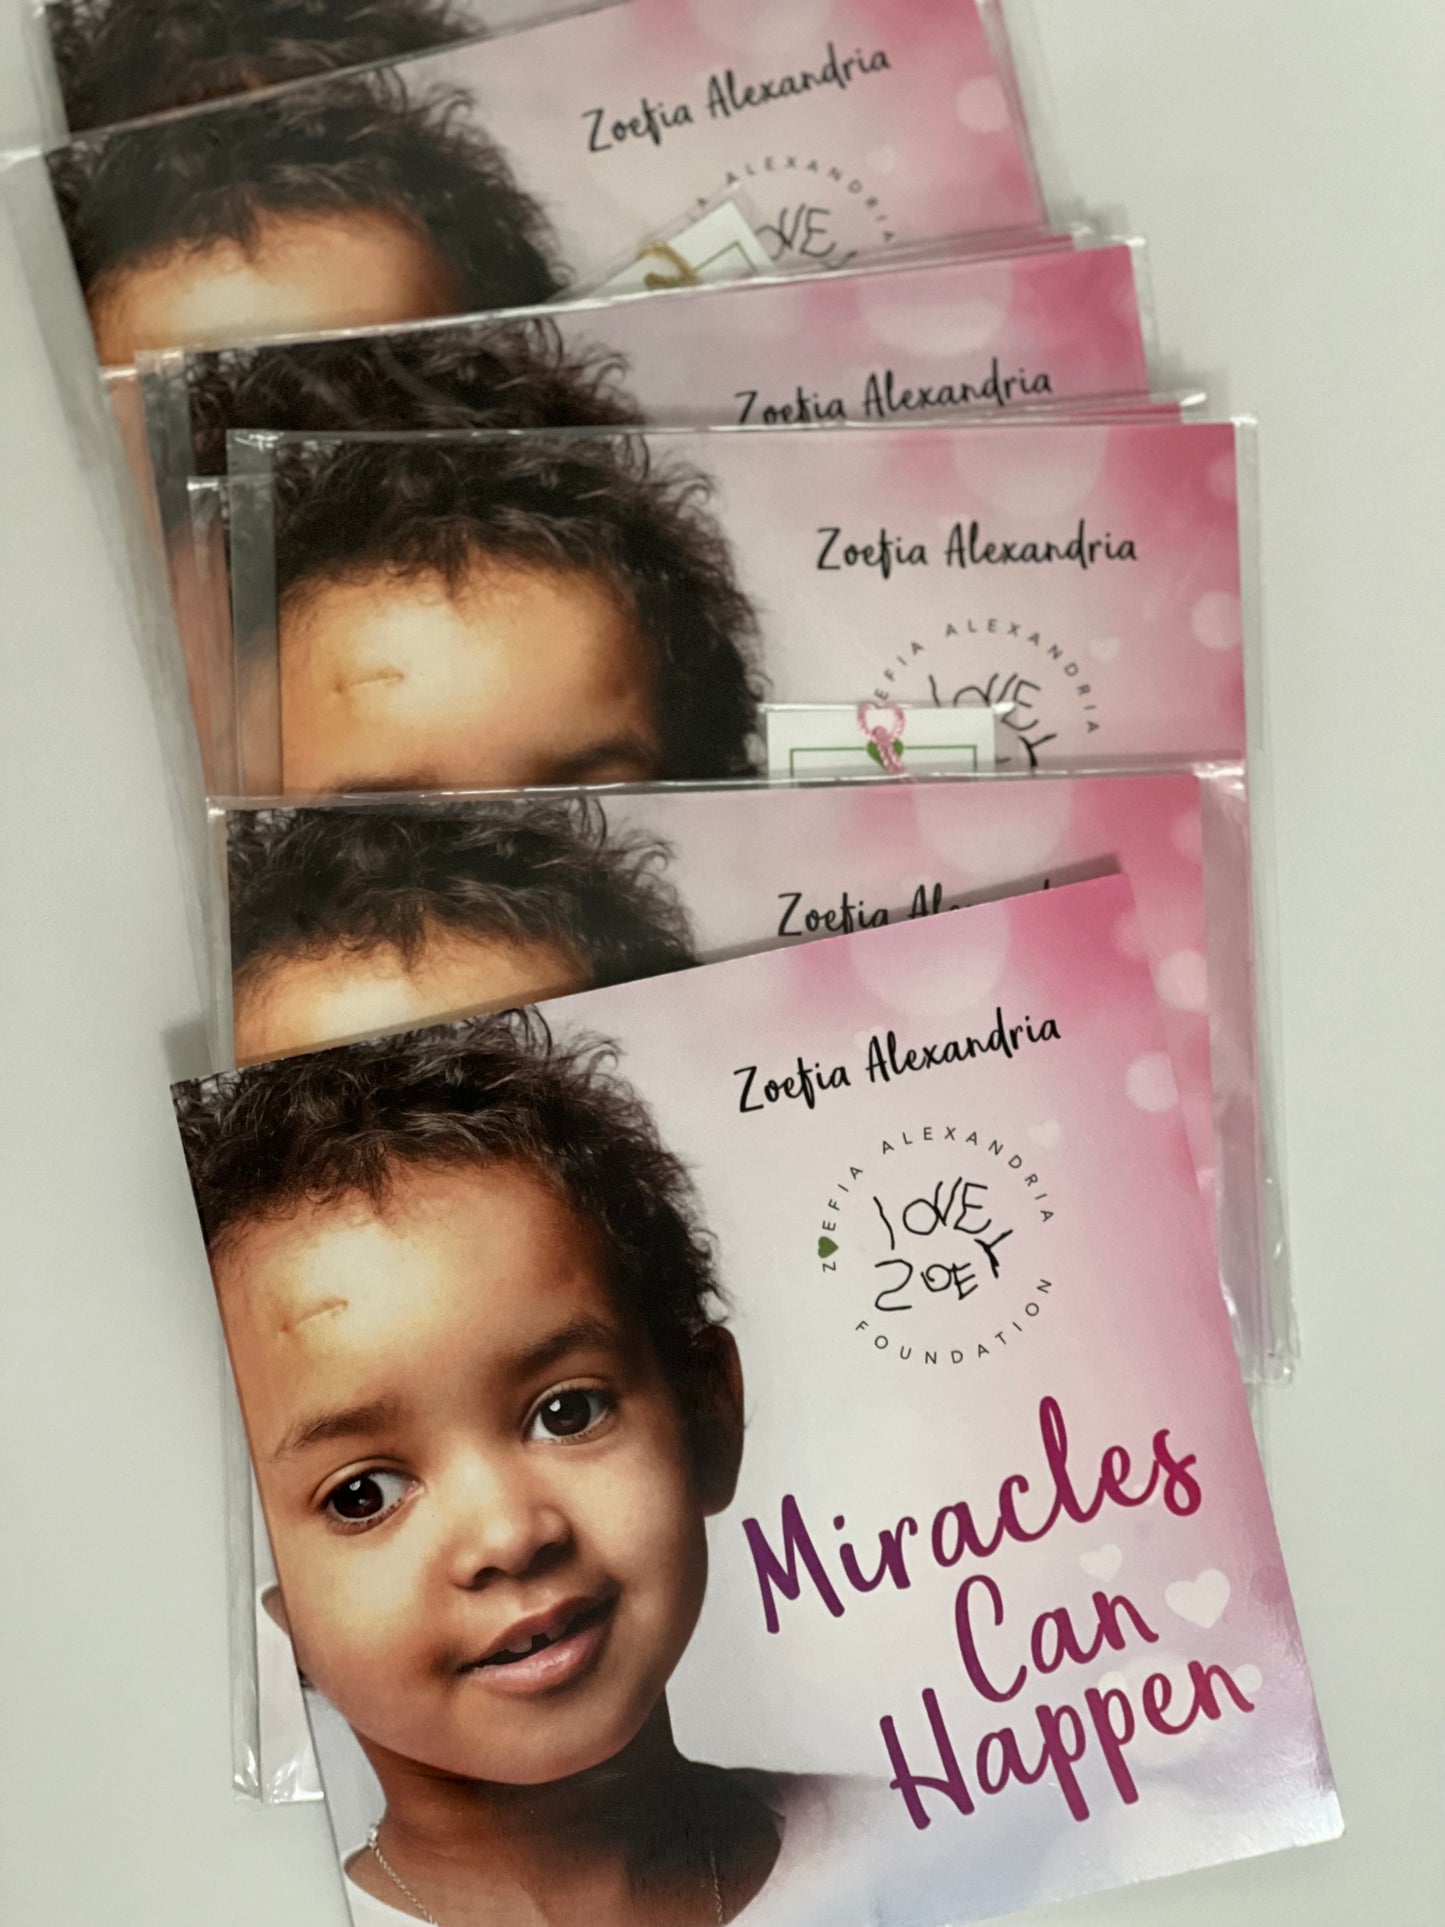 Miracles Can Happen by Zoefia Alexandria